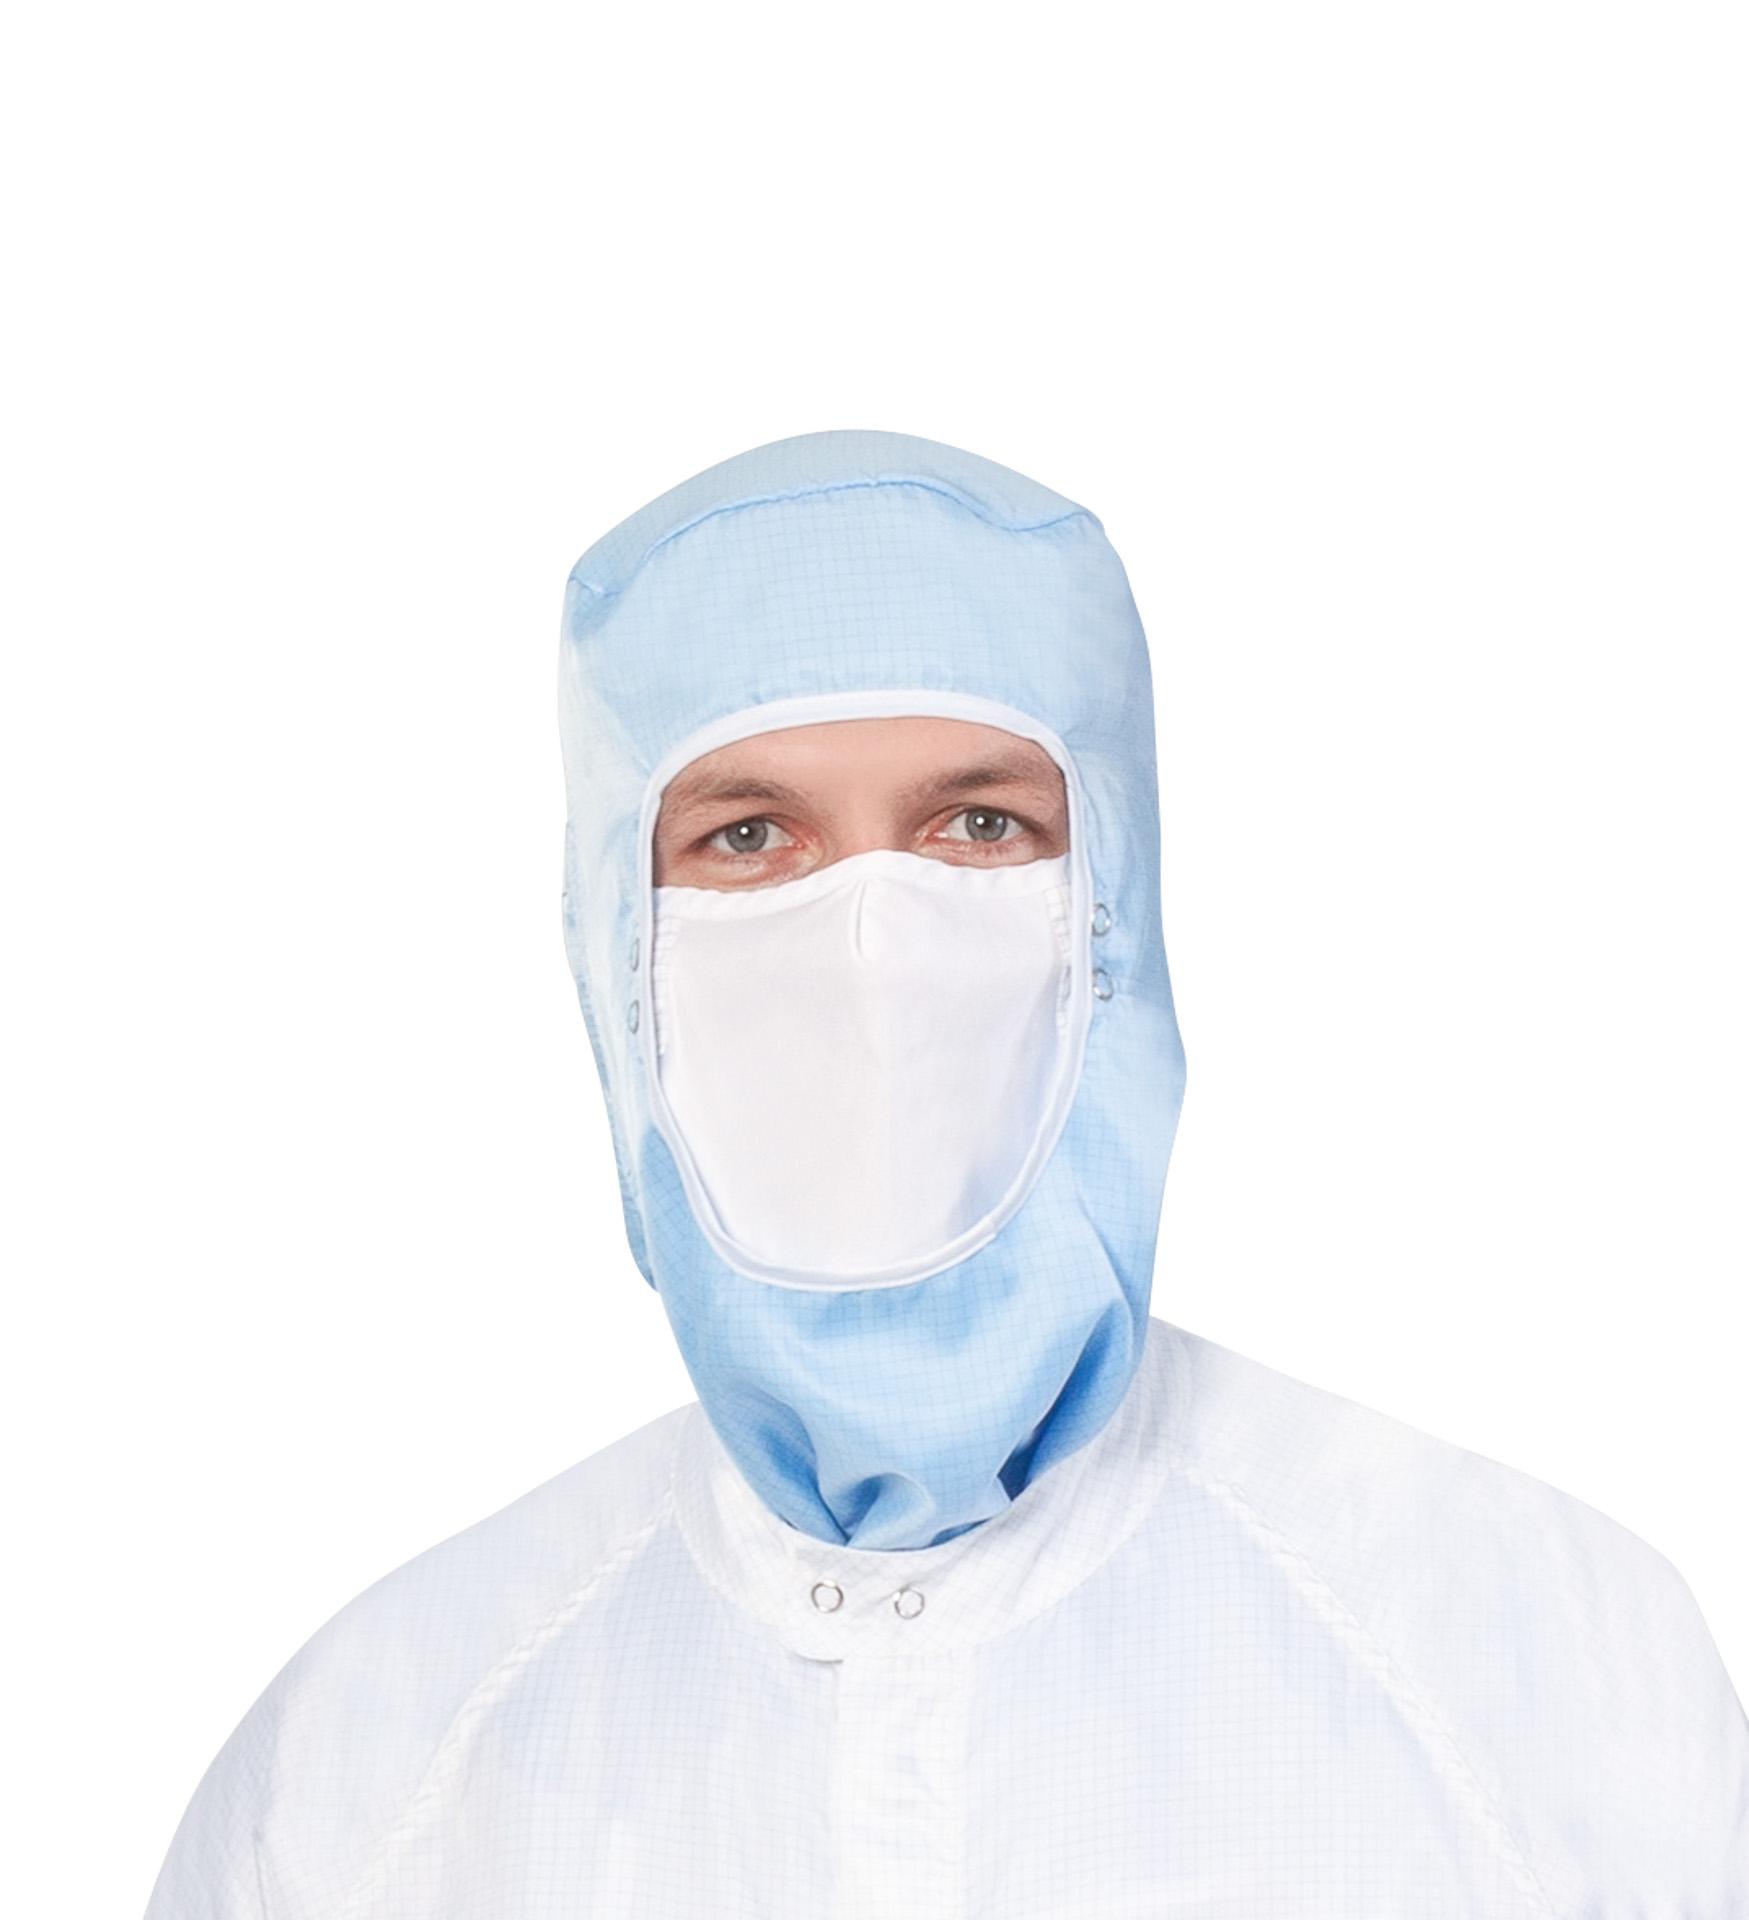 Reusable cleanroom beard protection for coveralls or hoods, for cleanroom class ISO 4-8, GMP A-C